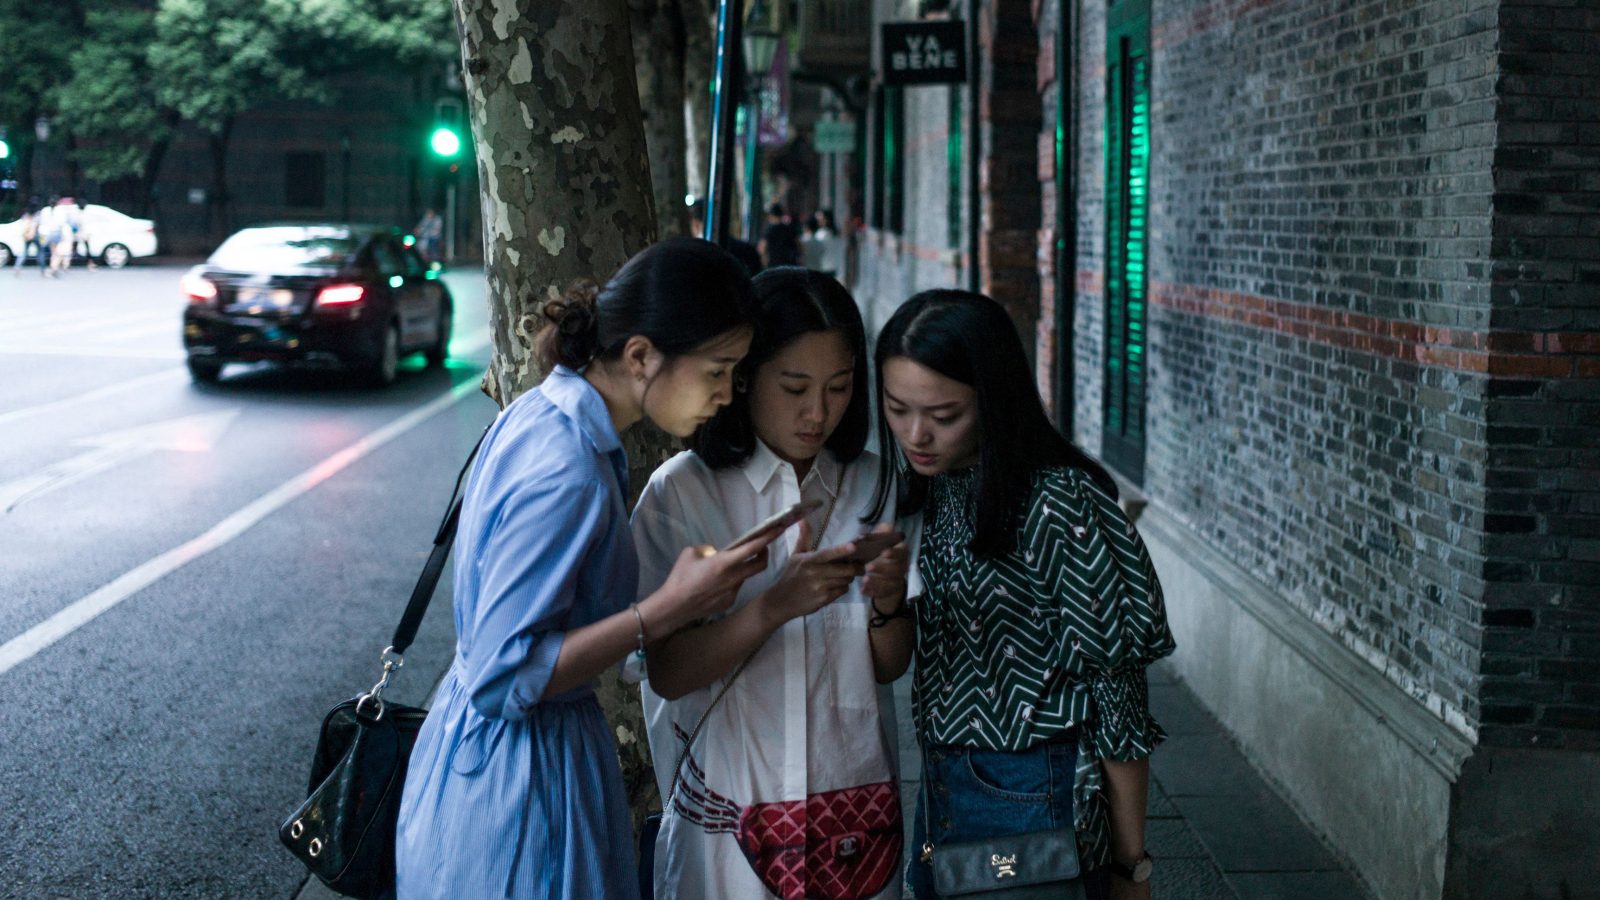 Not a fake: social media in China delighted to discover world